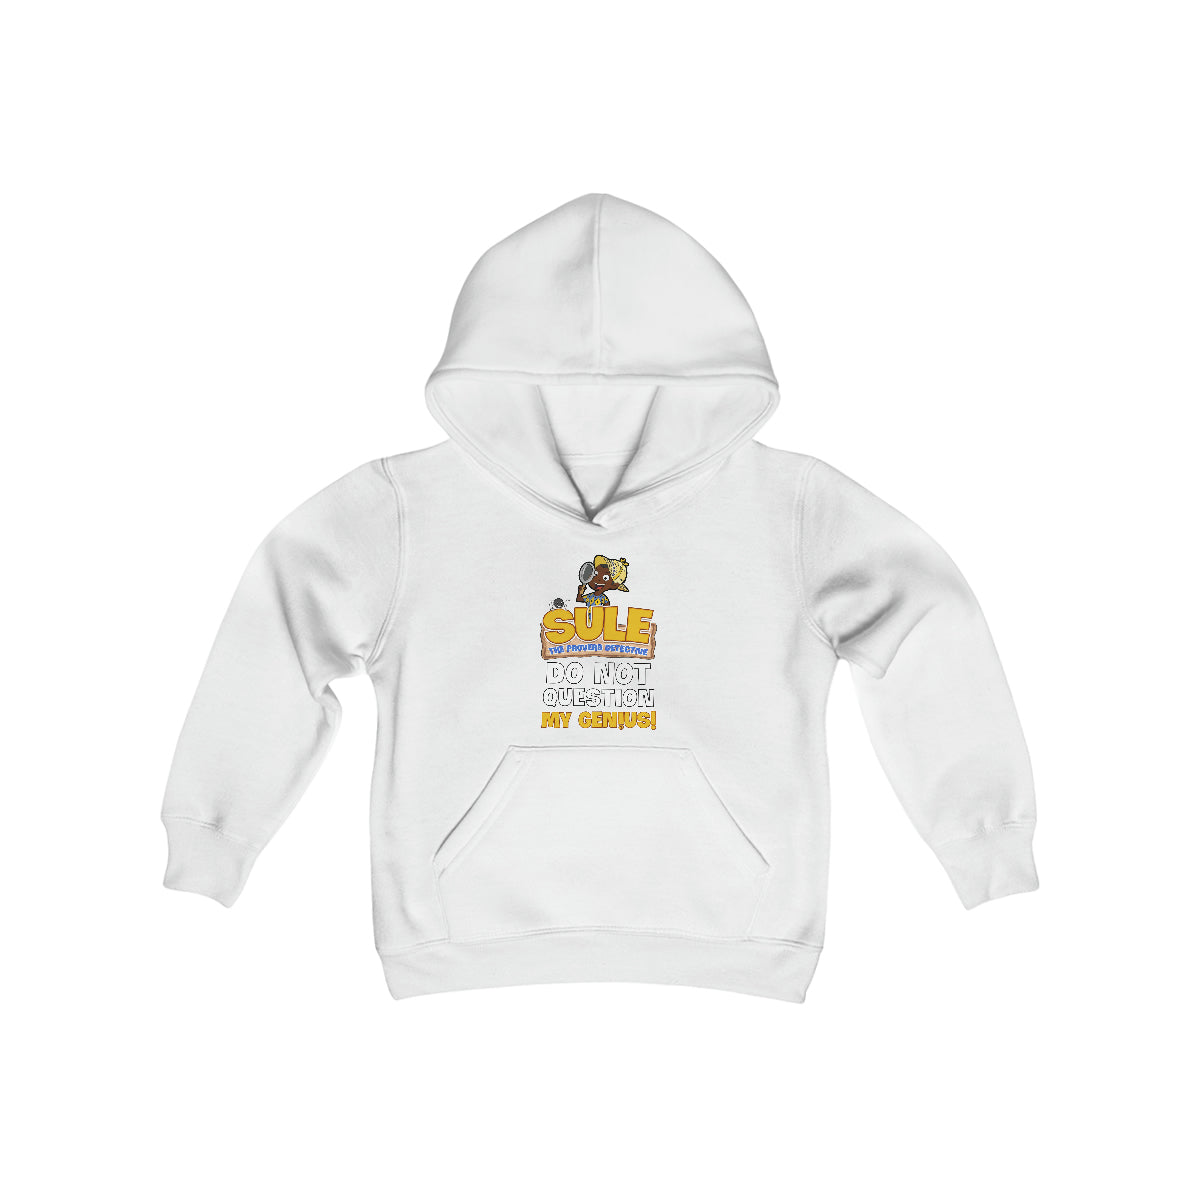 Sule the Proverb Detective Youth Heavy Blend Hooded Sweatshirt